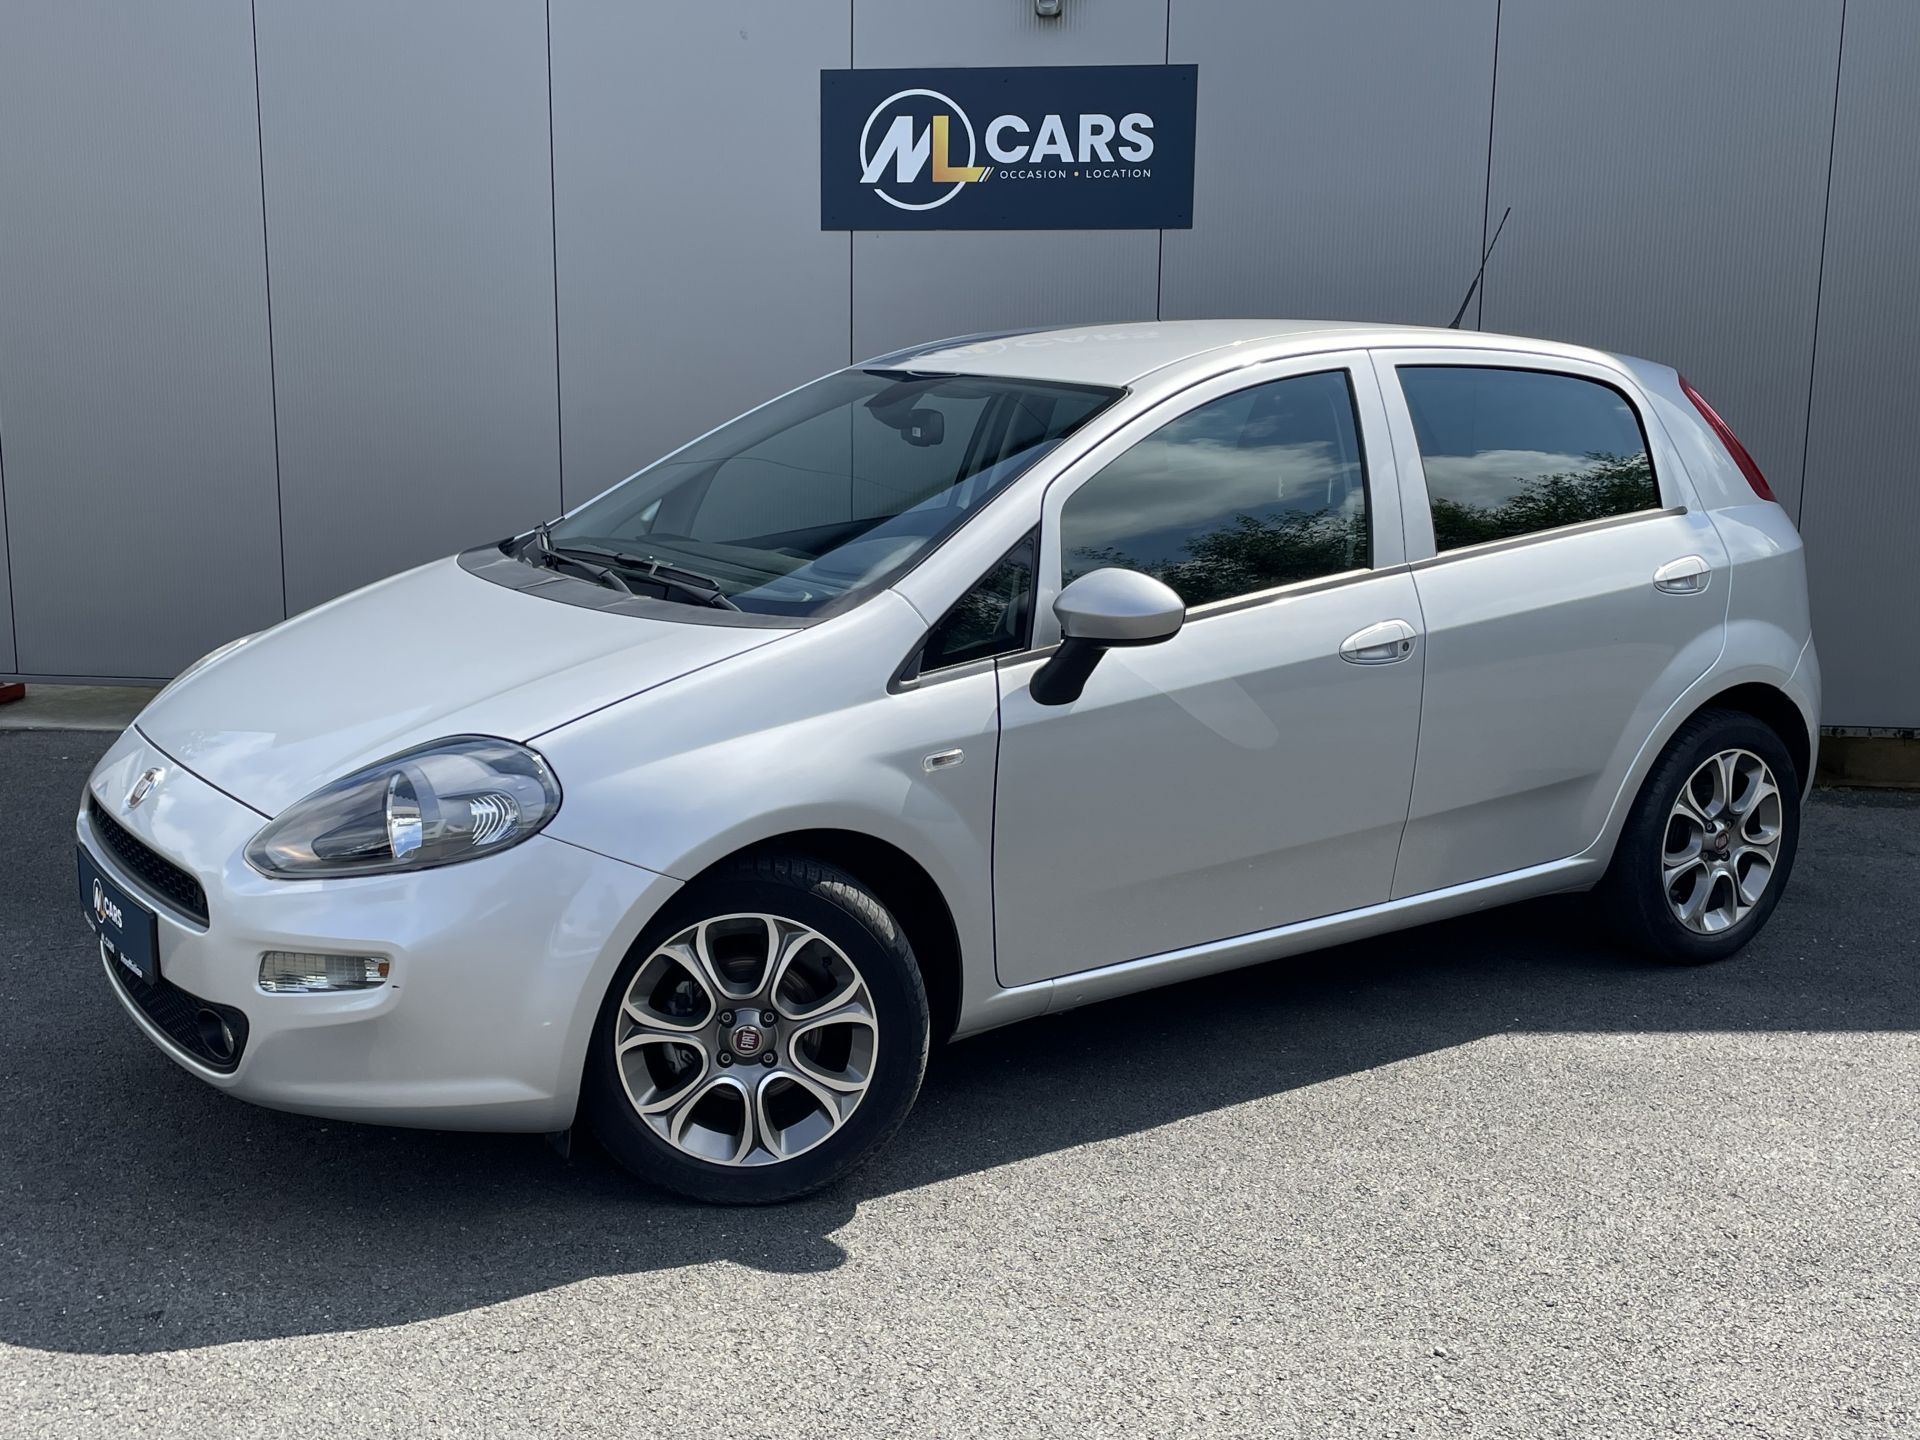 occasion FIAT PUNTO occasion 0.9 TWINAIR 100HP 2019 5 portes - ML Cars à Houffalize